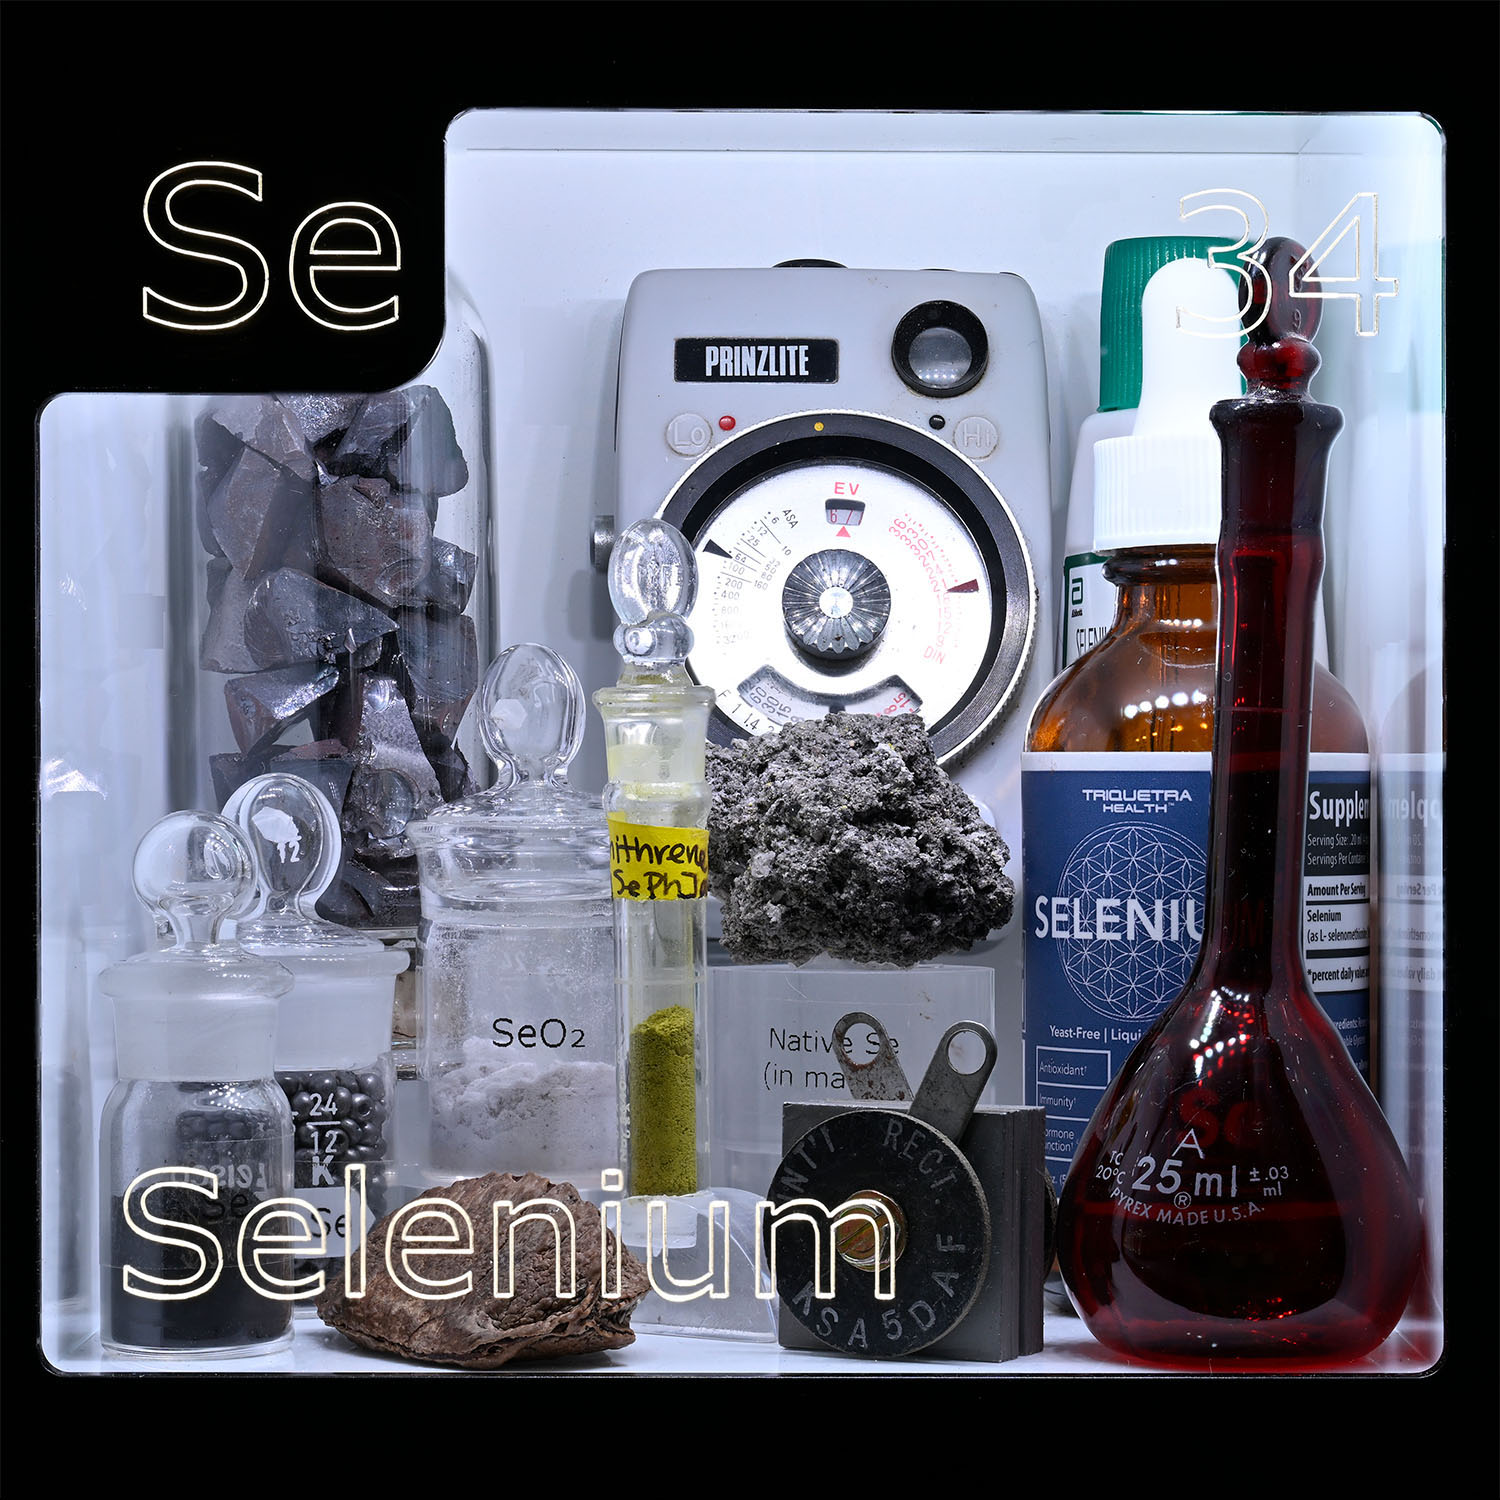 Periodic Table Display - close up of Selenium the items that contain that element